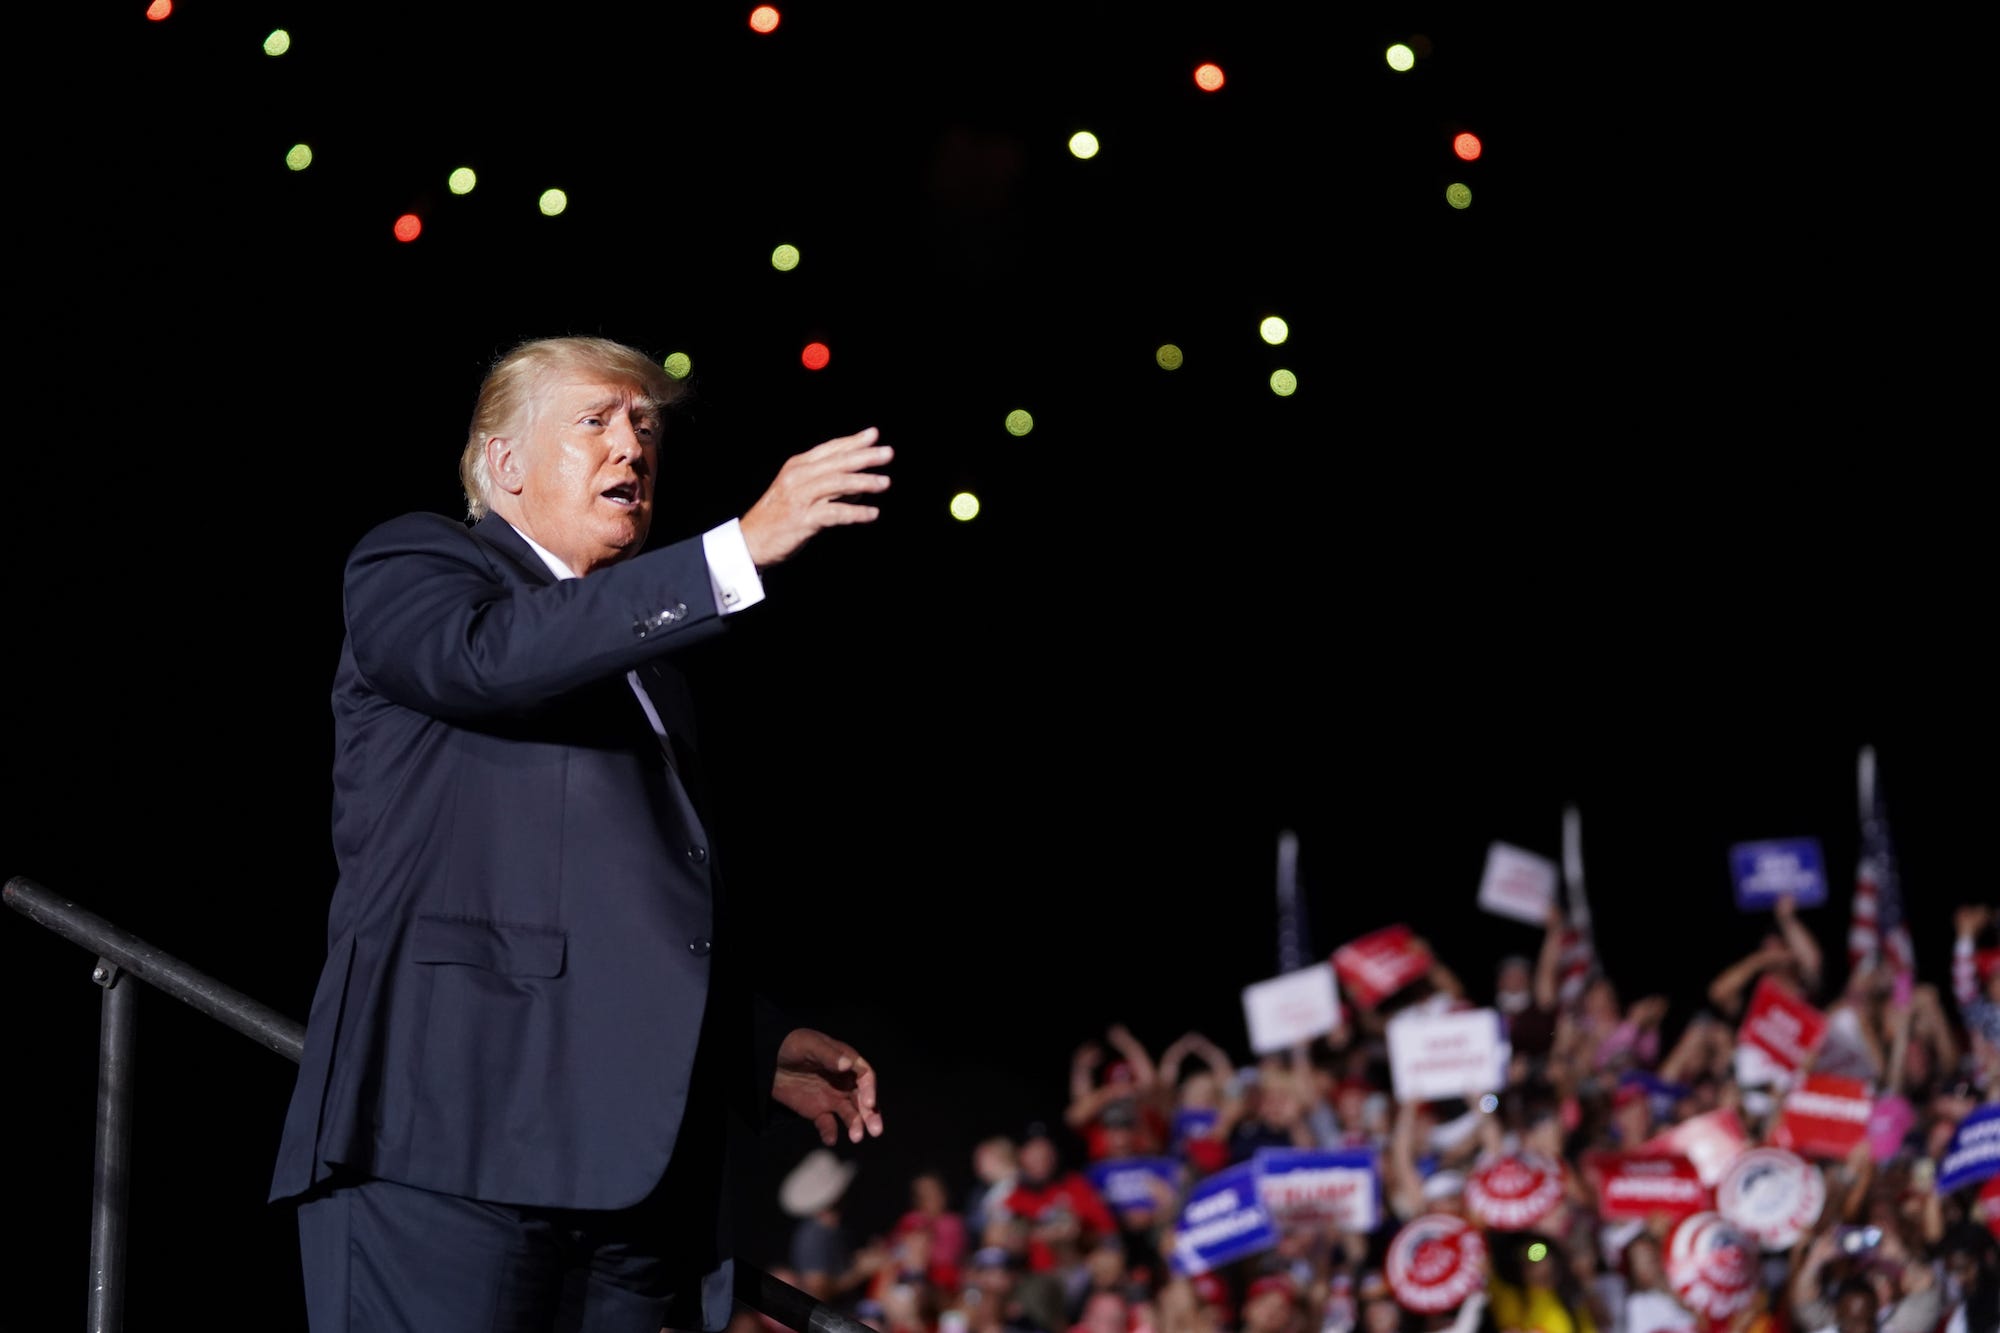 Former President Donald Trump, clad in a dark suit, his right arm extended upward as he stands against a starry sky, waves to attendees at a political rally in Georgia.